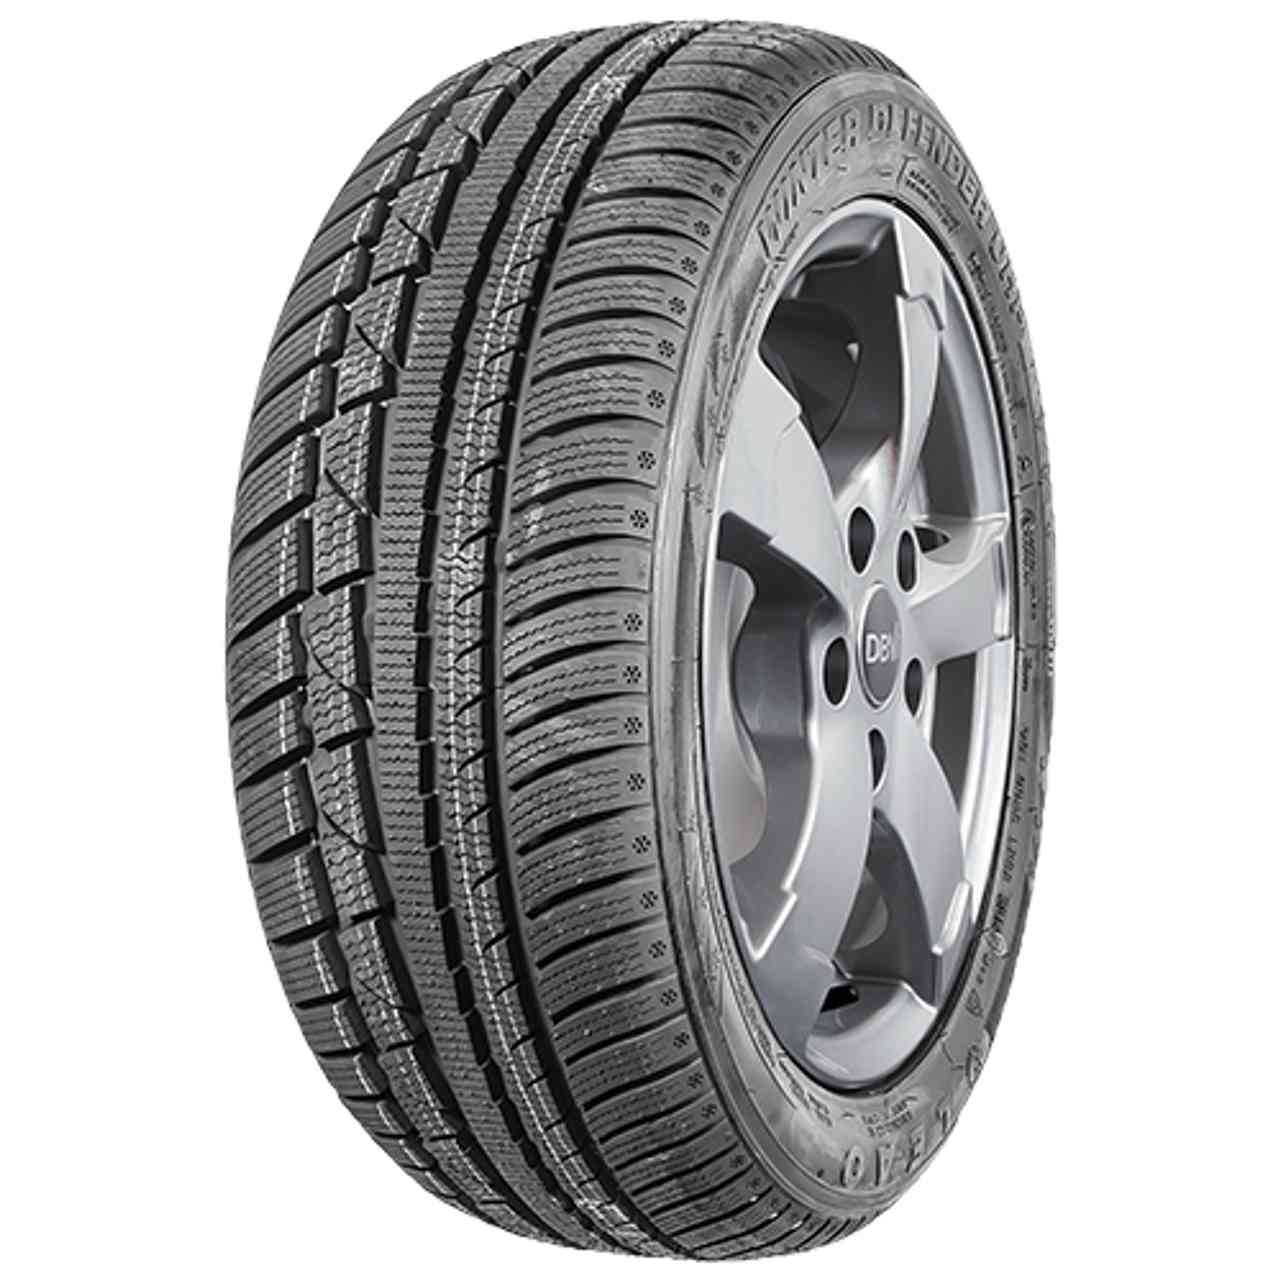 LEAO WINTER DEFENDER UHP 245/40R18 97V BSW XL